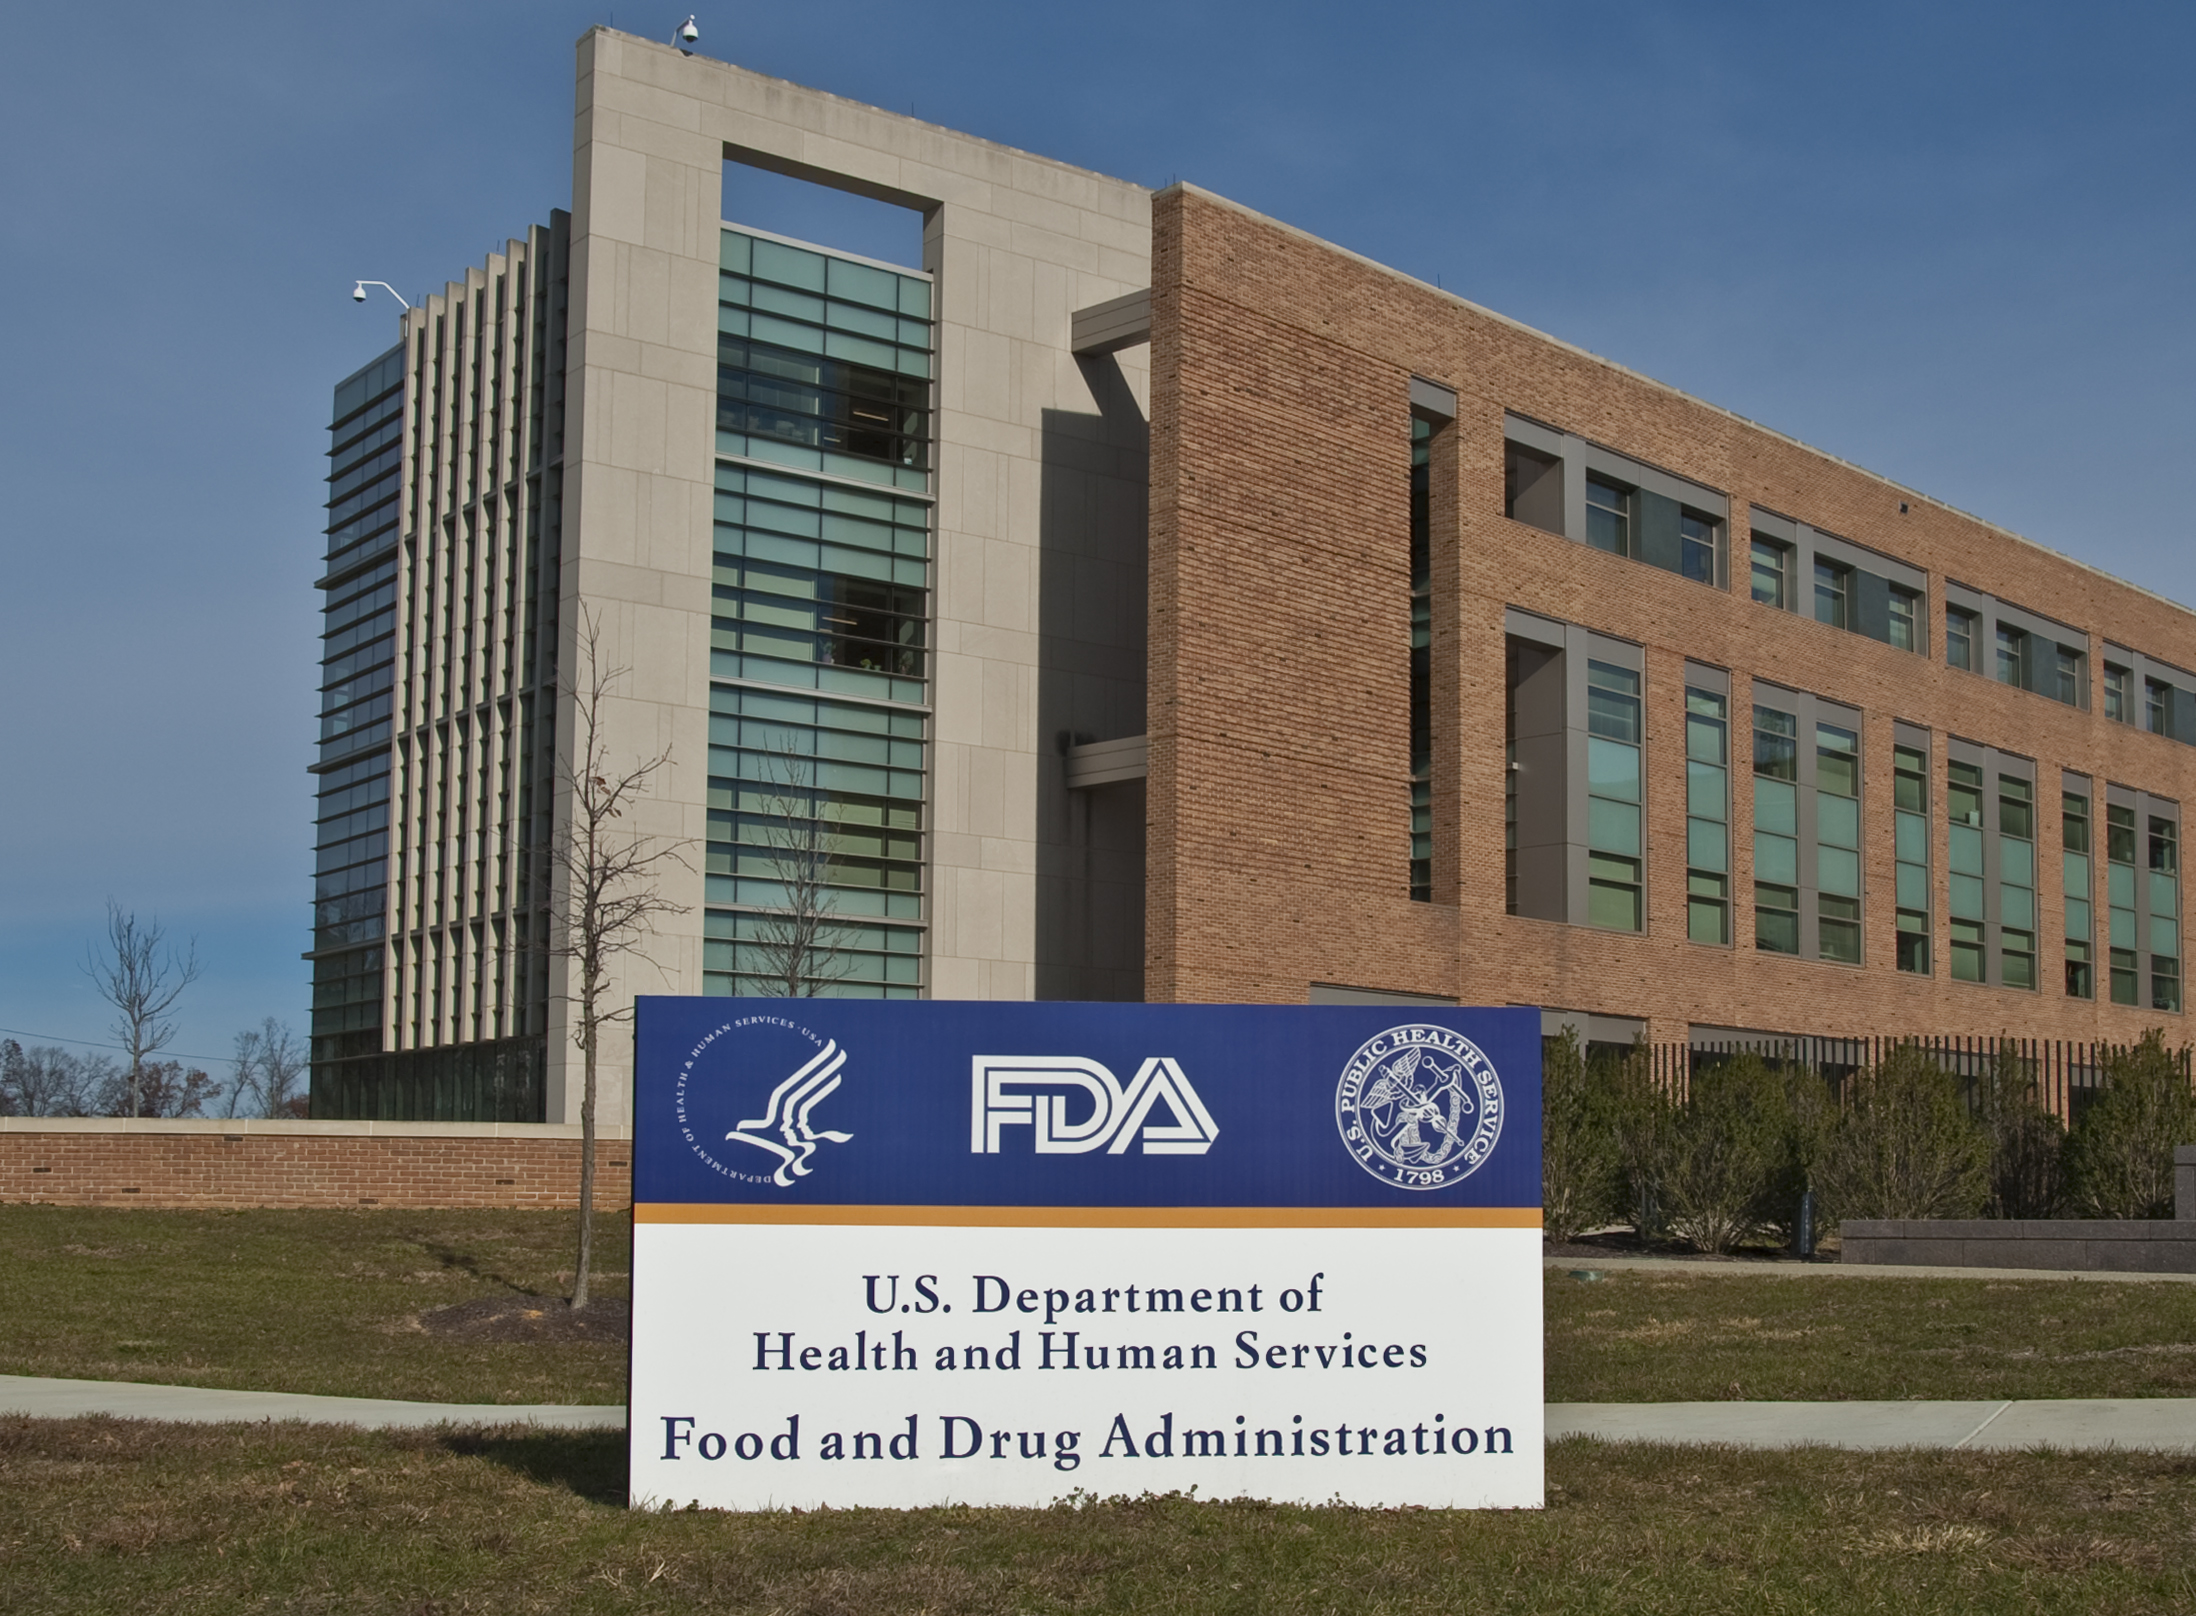 A Modern, Adaptive FDA Should Support Patients’ Right To Try New Medications